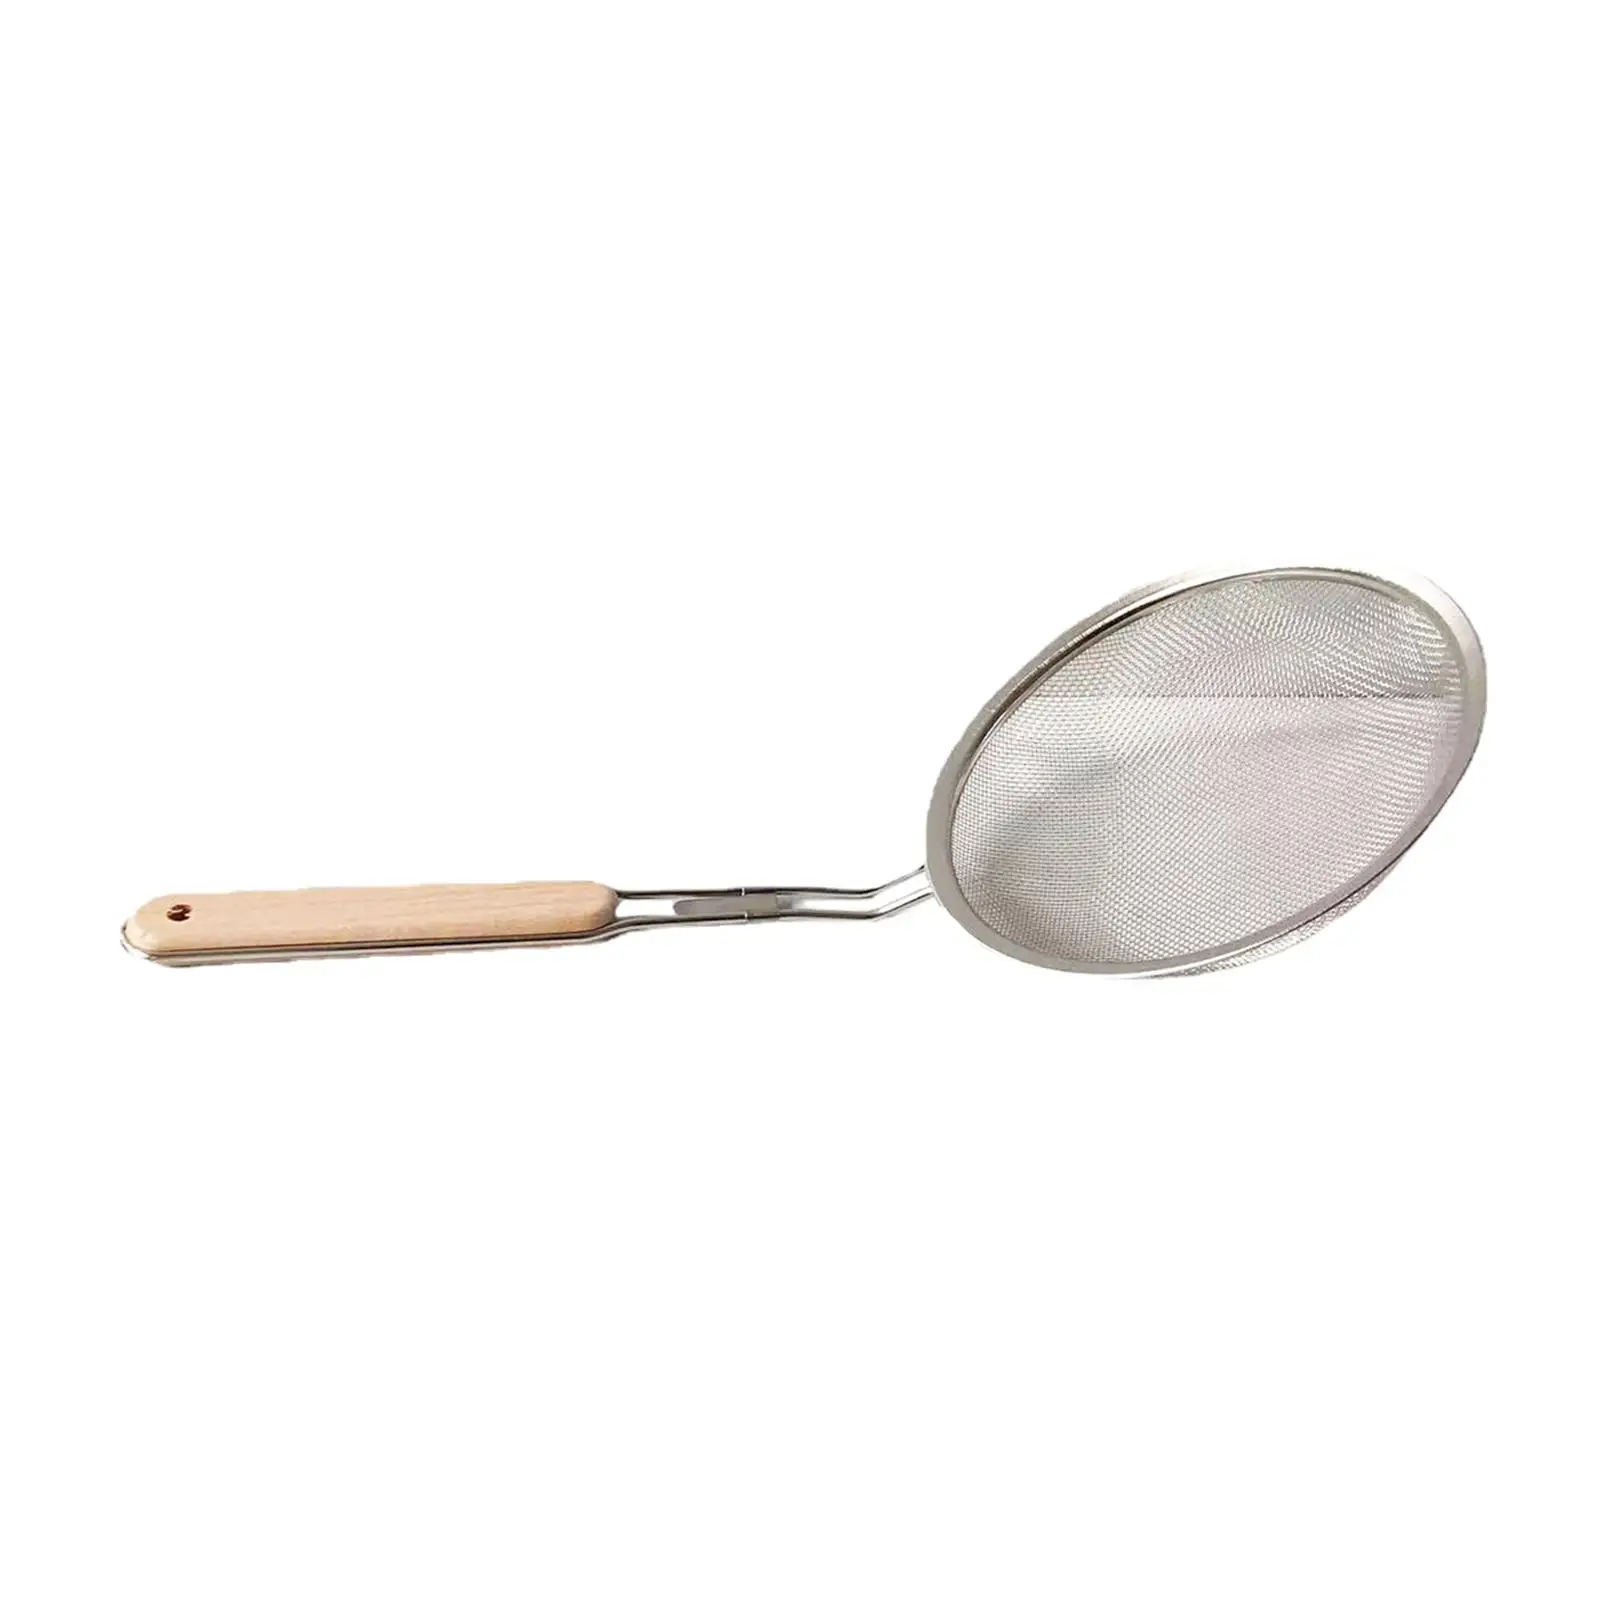 Multi Functional Skimmer Spoon with Long Handle Soup Ladle Filter for Skimming Grease and Foam